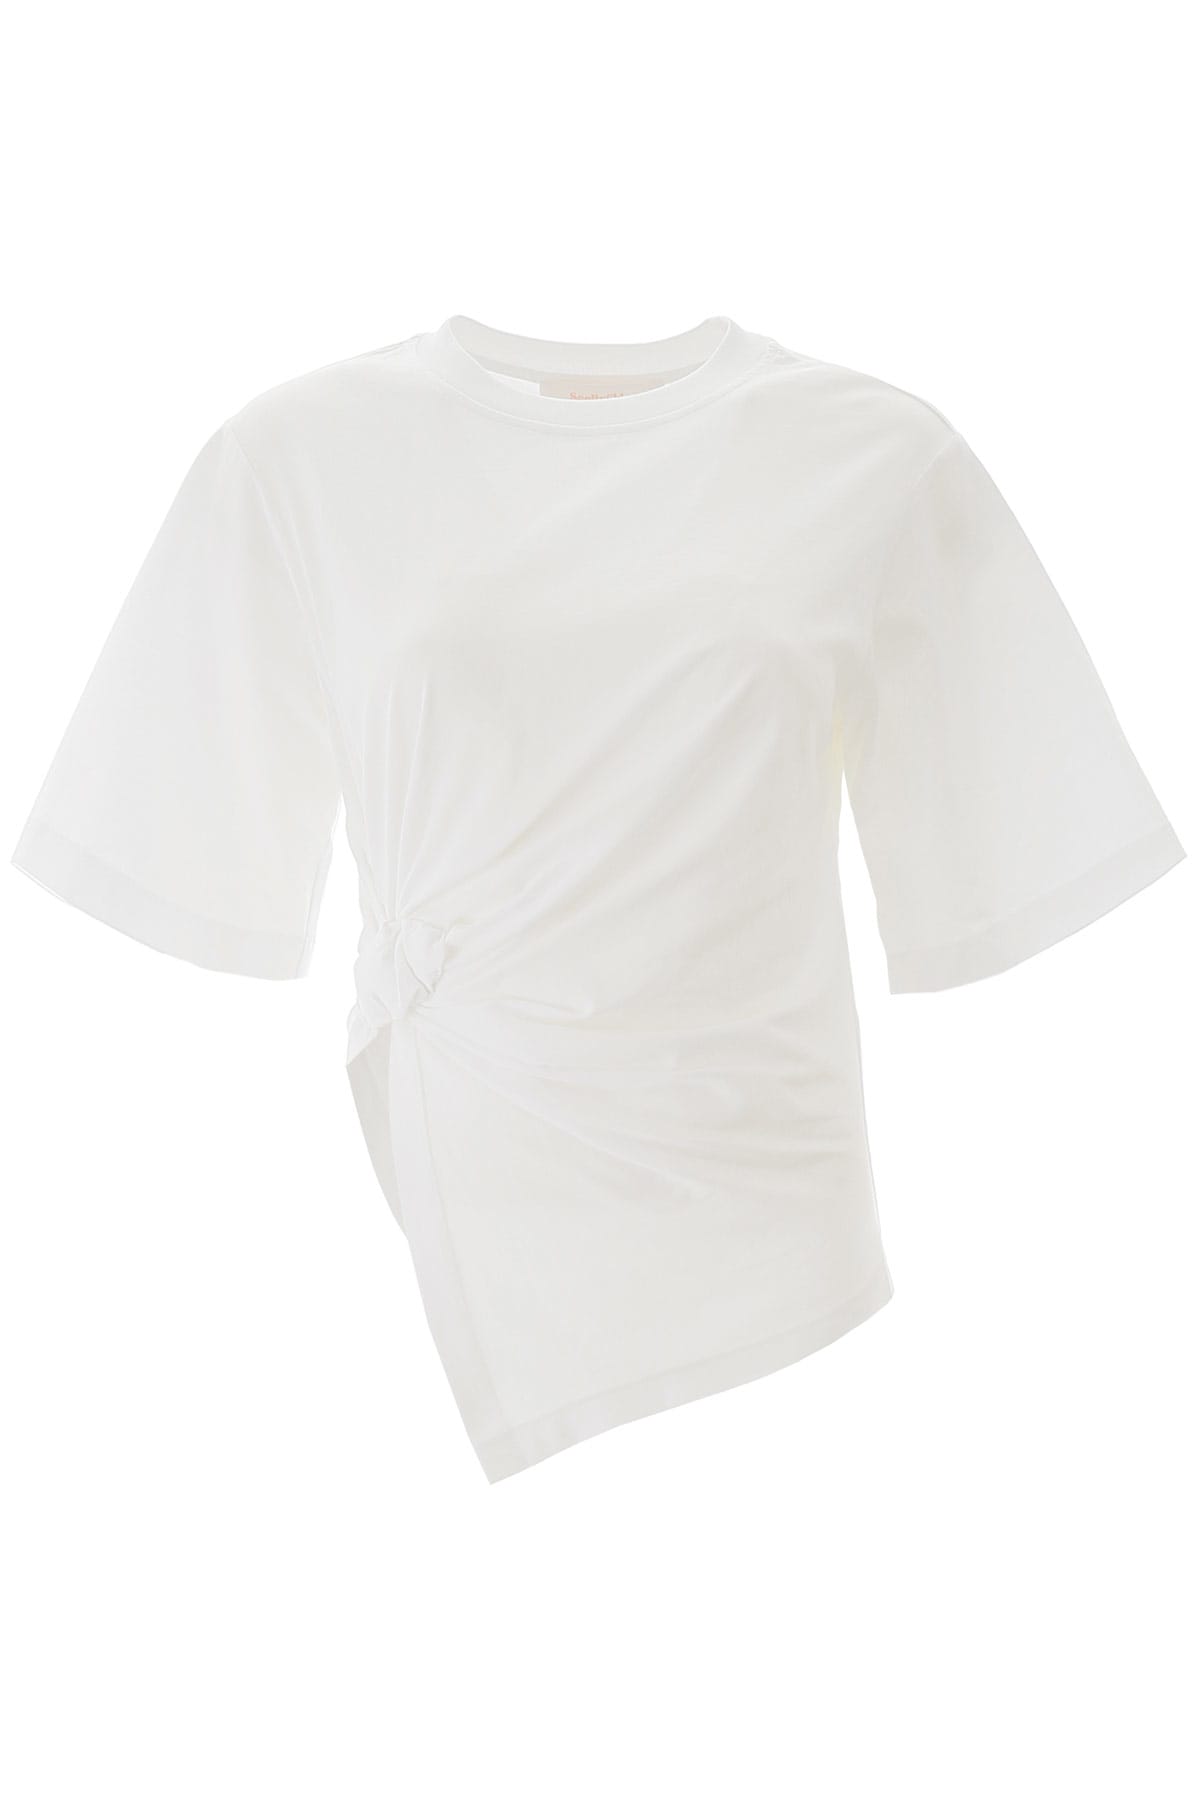 SEE BY CHLOÉ KNOT T-SHIRT,11228822